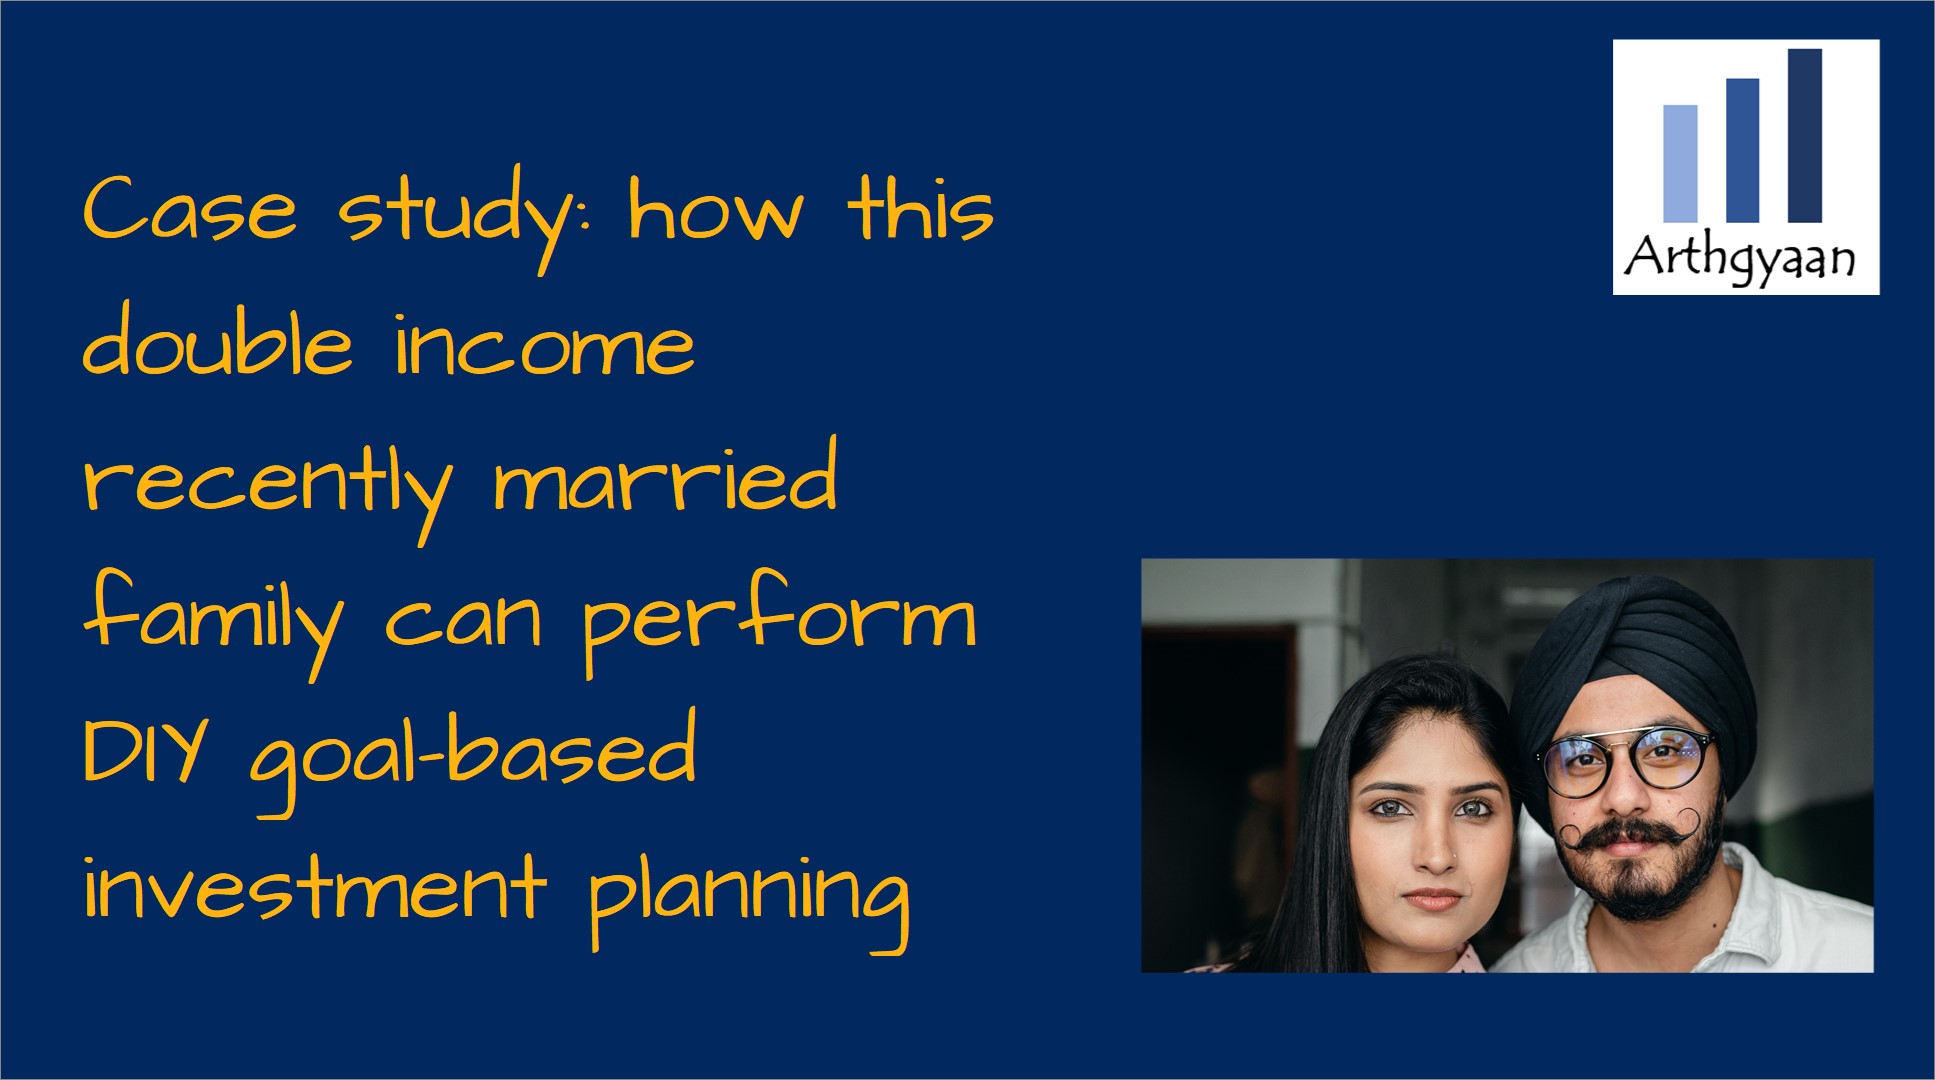 Case study: how this double income recently married family can perform DIY goal-based investment planning